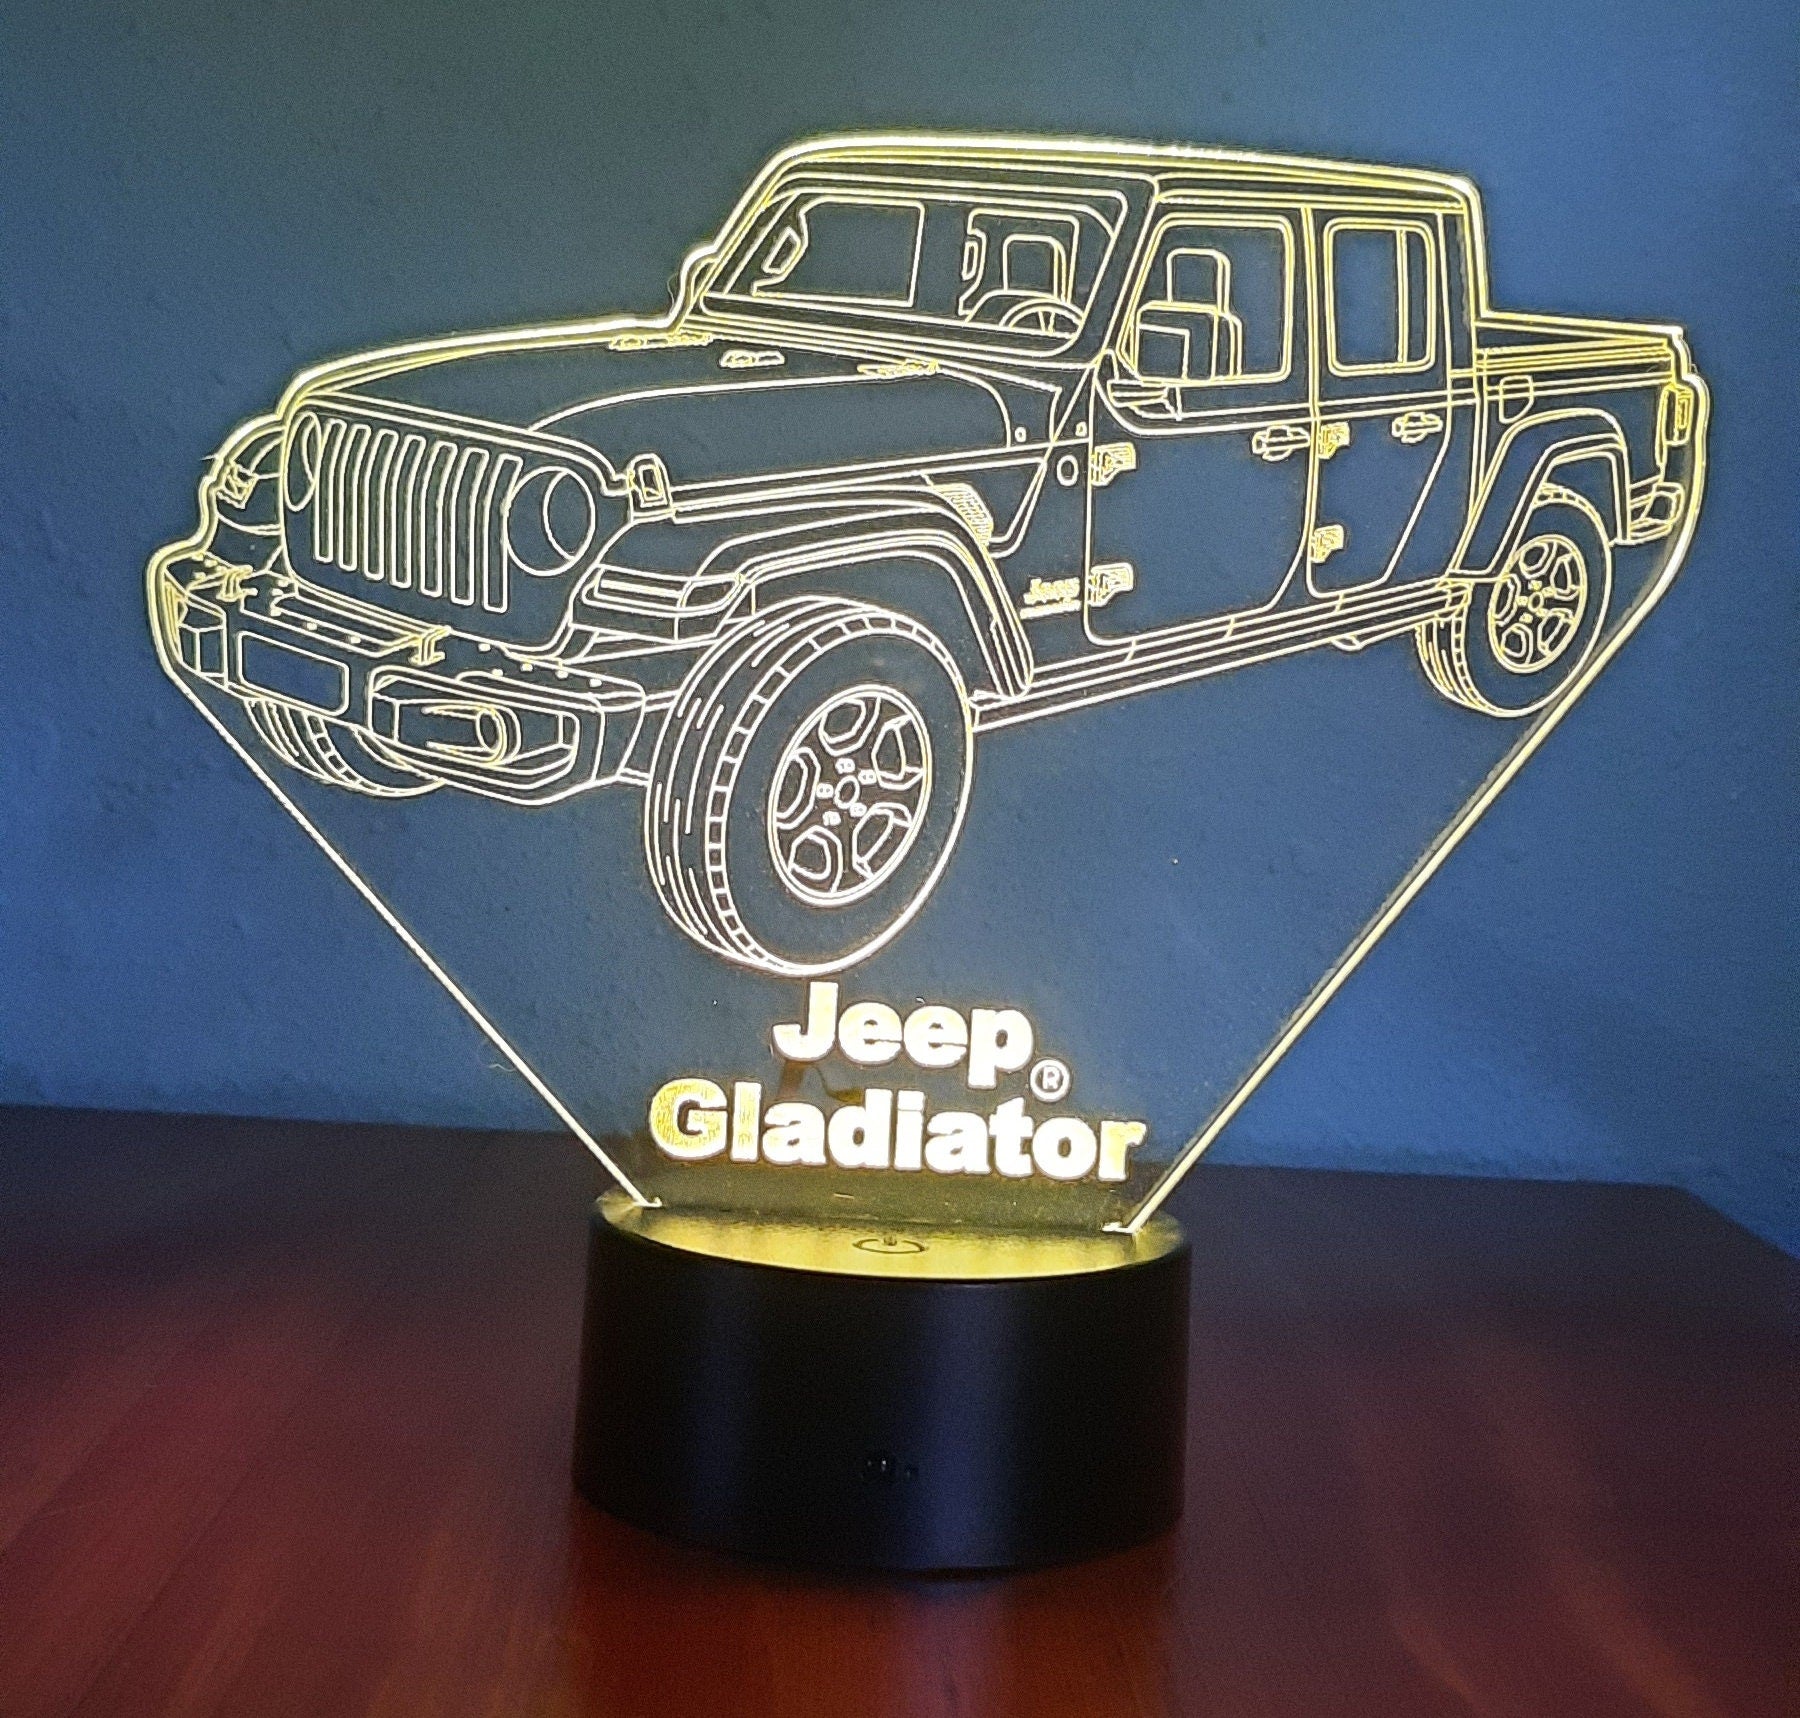 Awesome "Jeep Gladiator" 3D LED lamp (1277) - FREE SHIPPING!